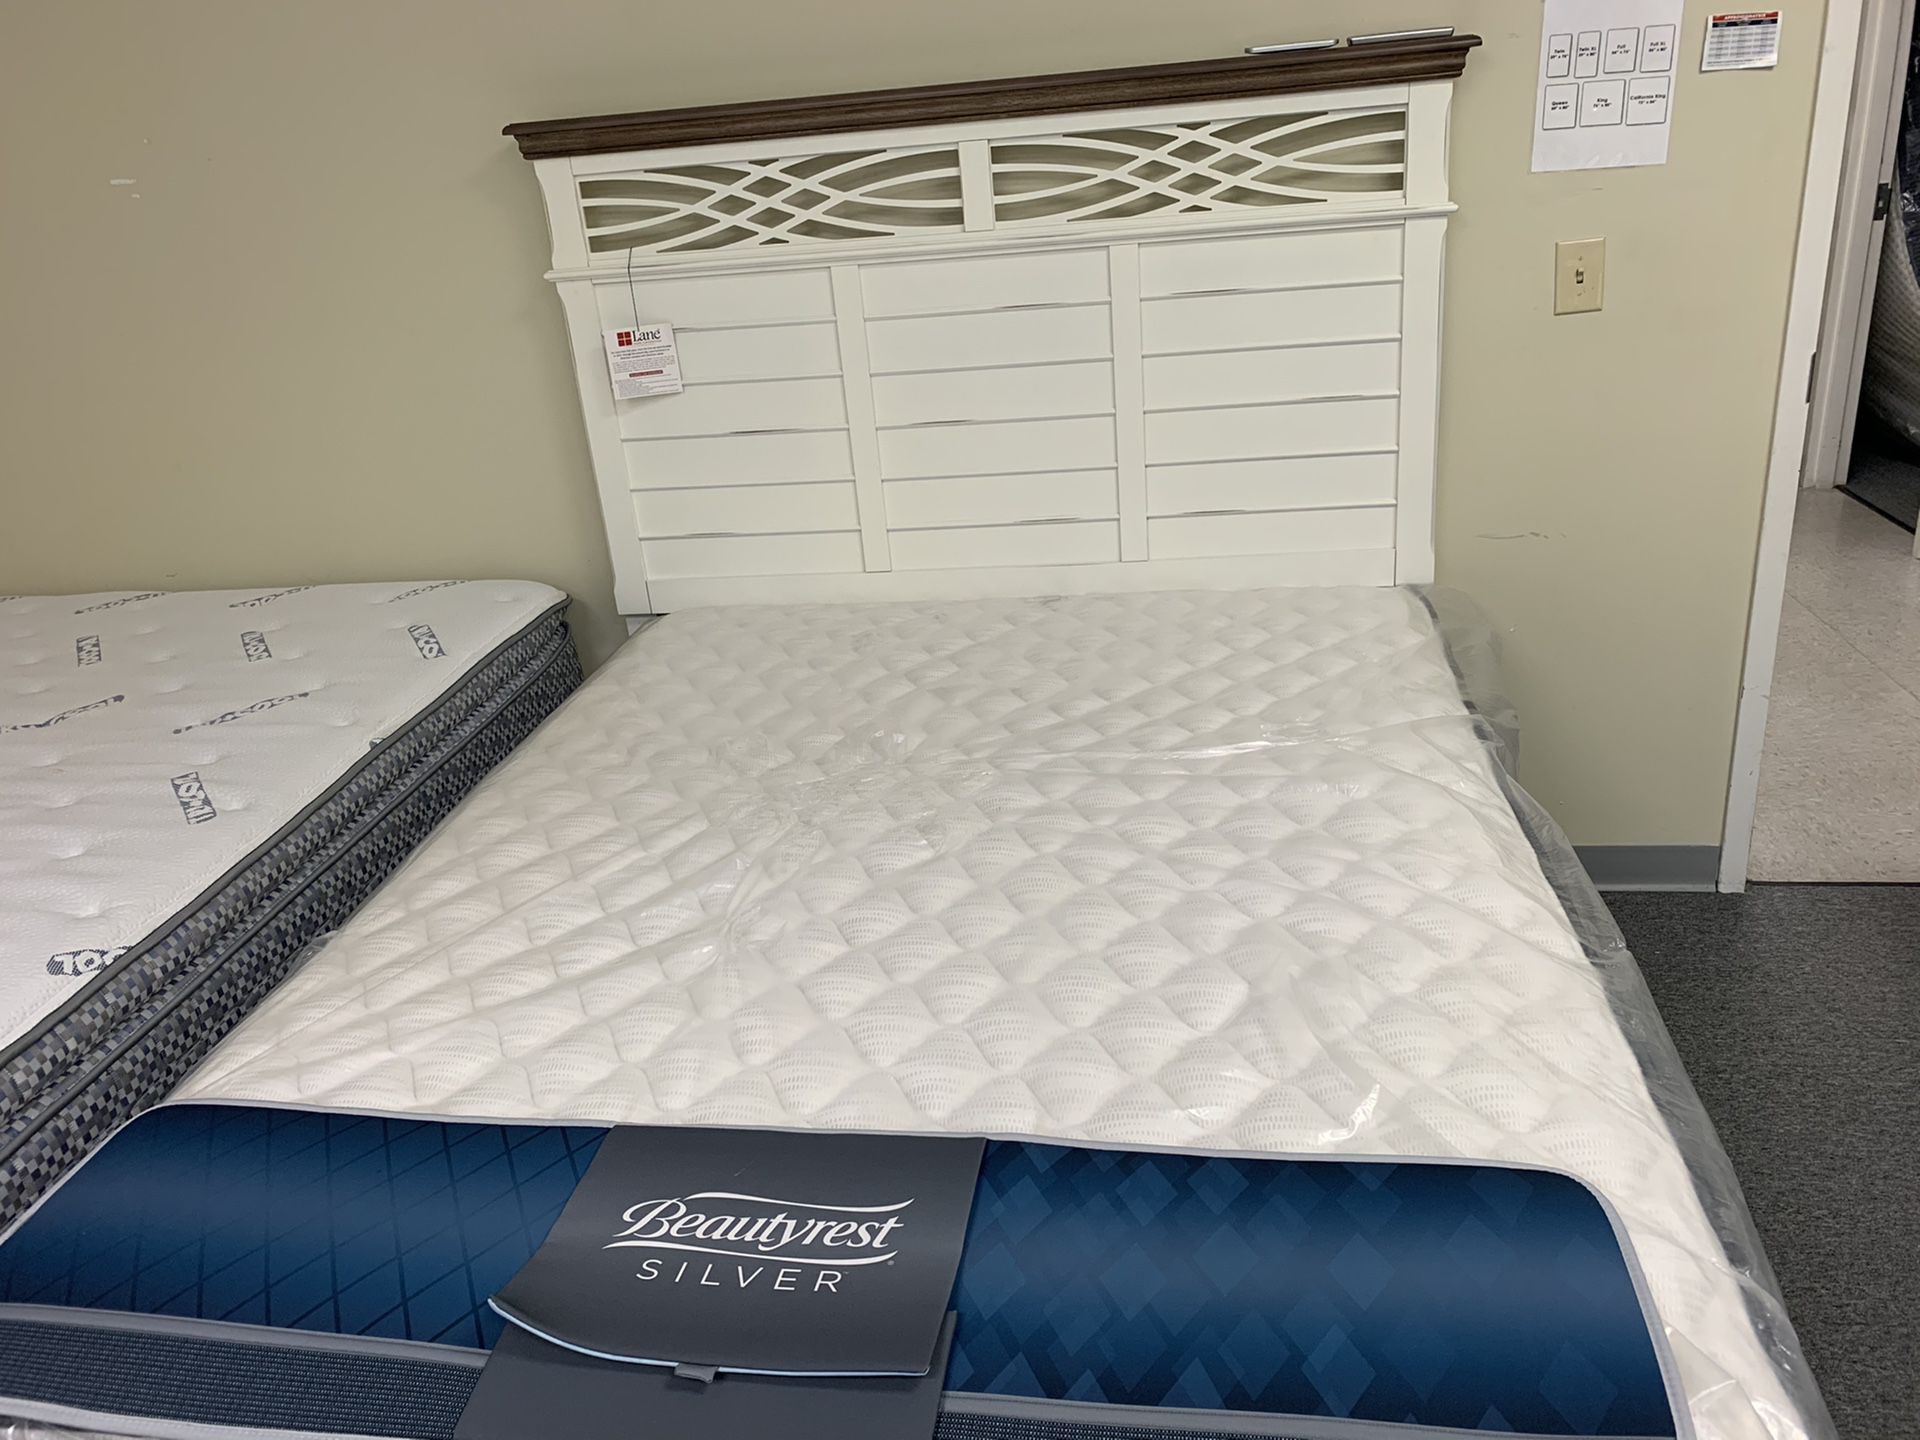 Happy New Mattress to you! Buy now-pay with Tax Refund! Ask me how?